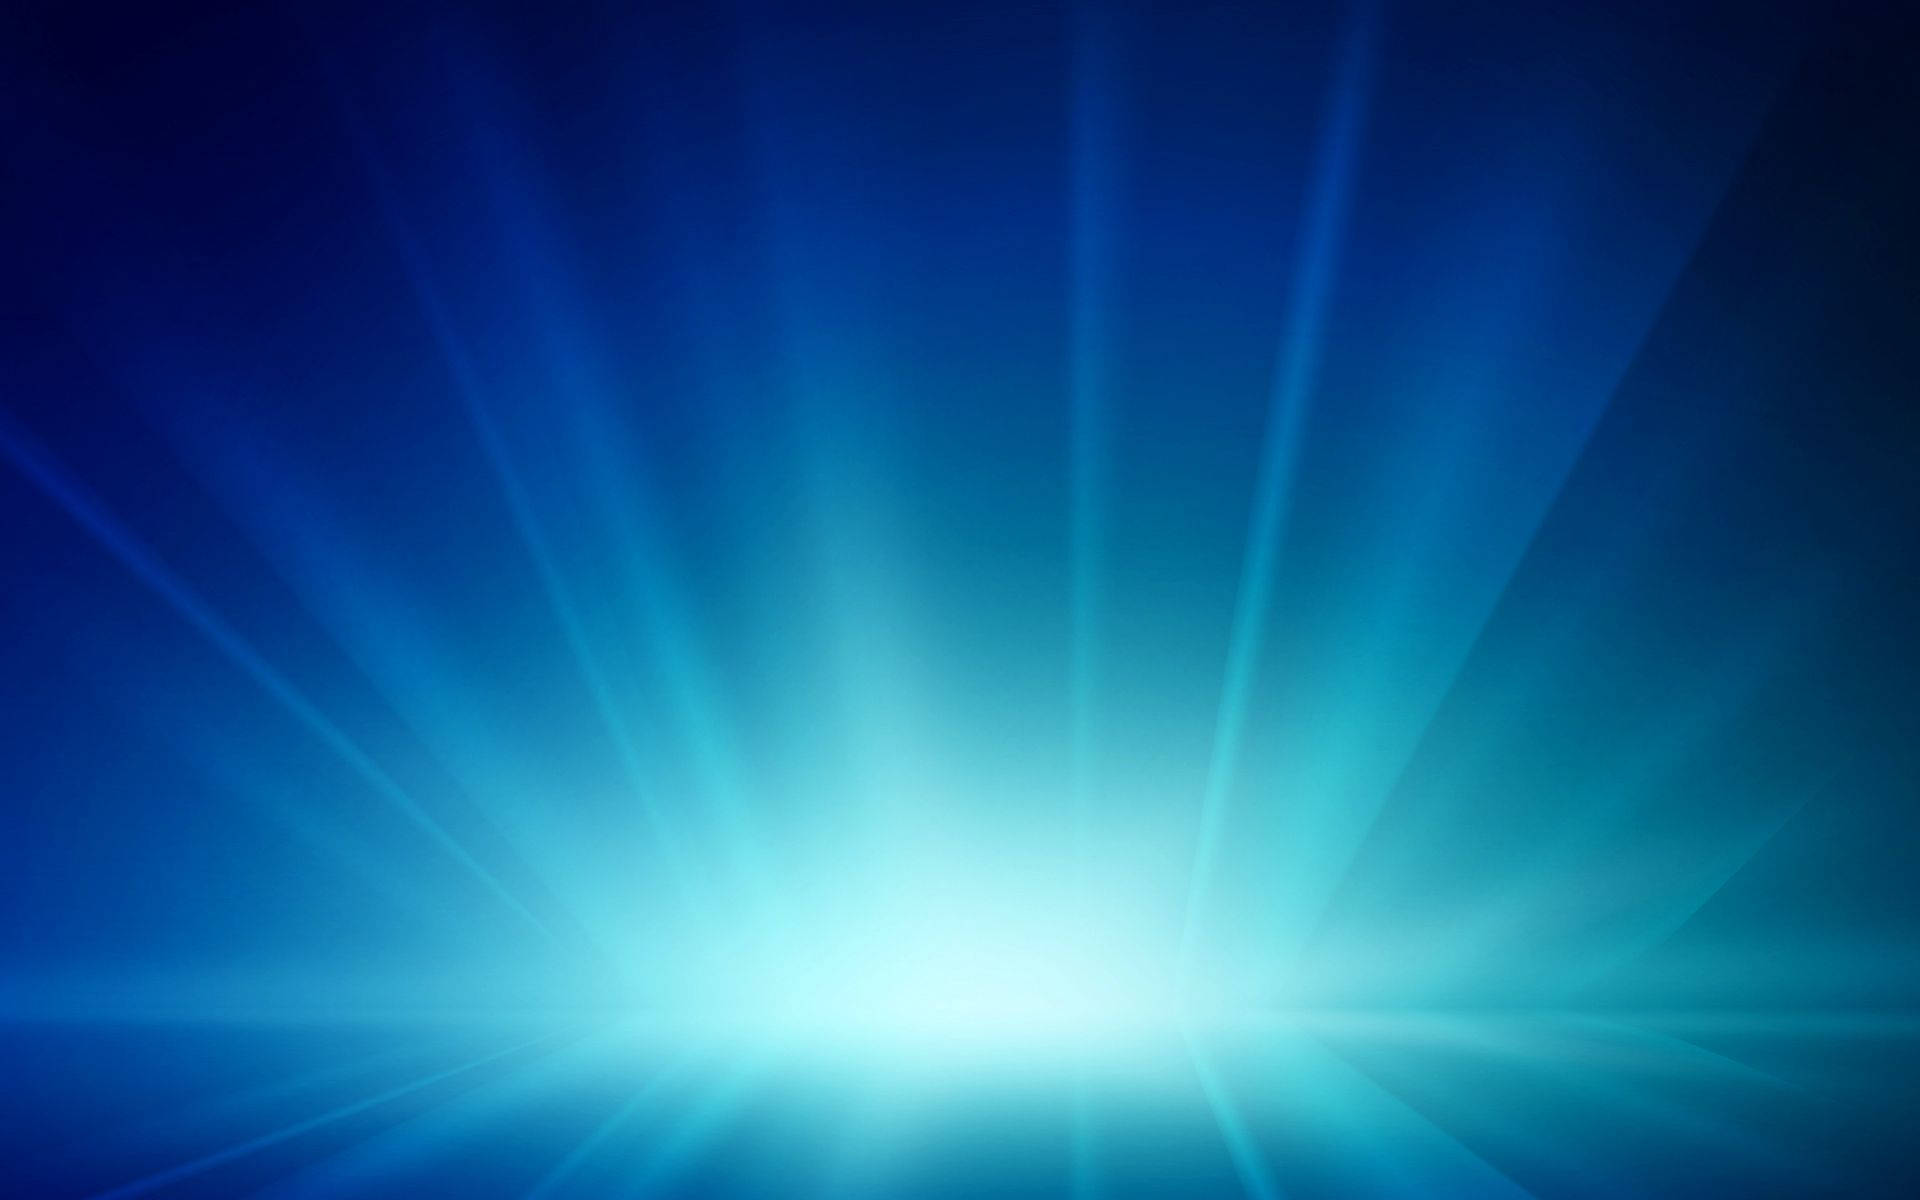 Blazing Blue Abstract Background Wallpaper